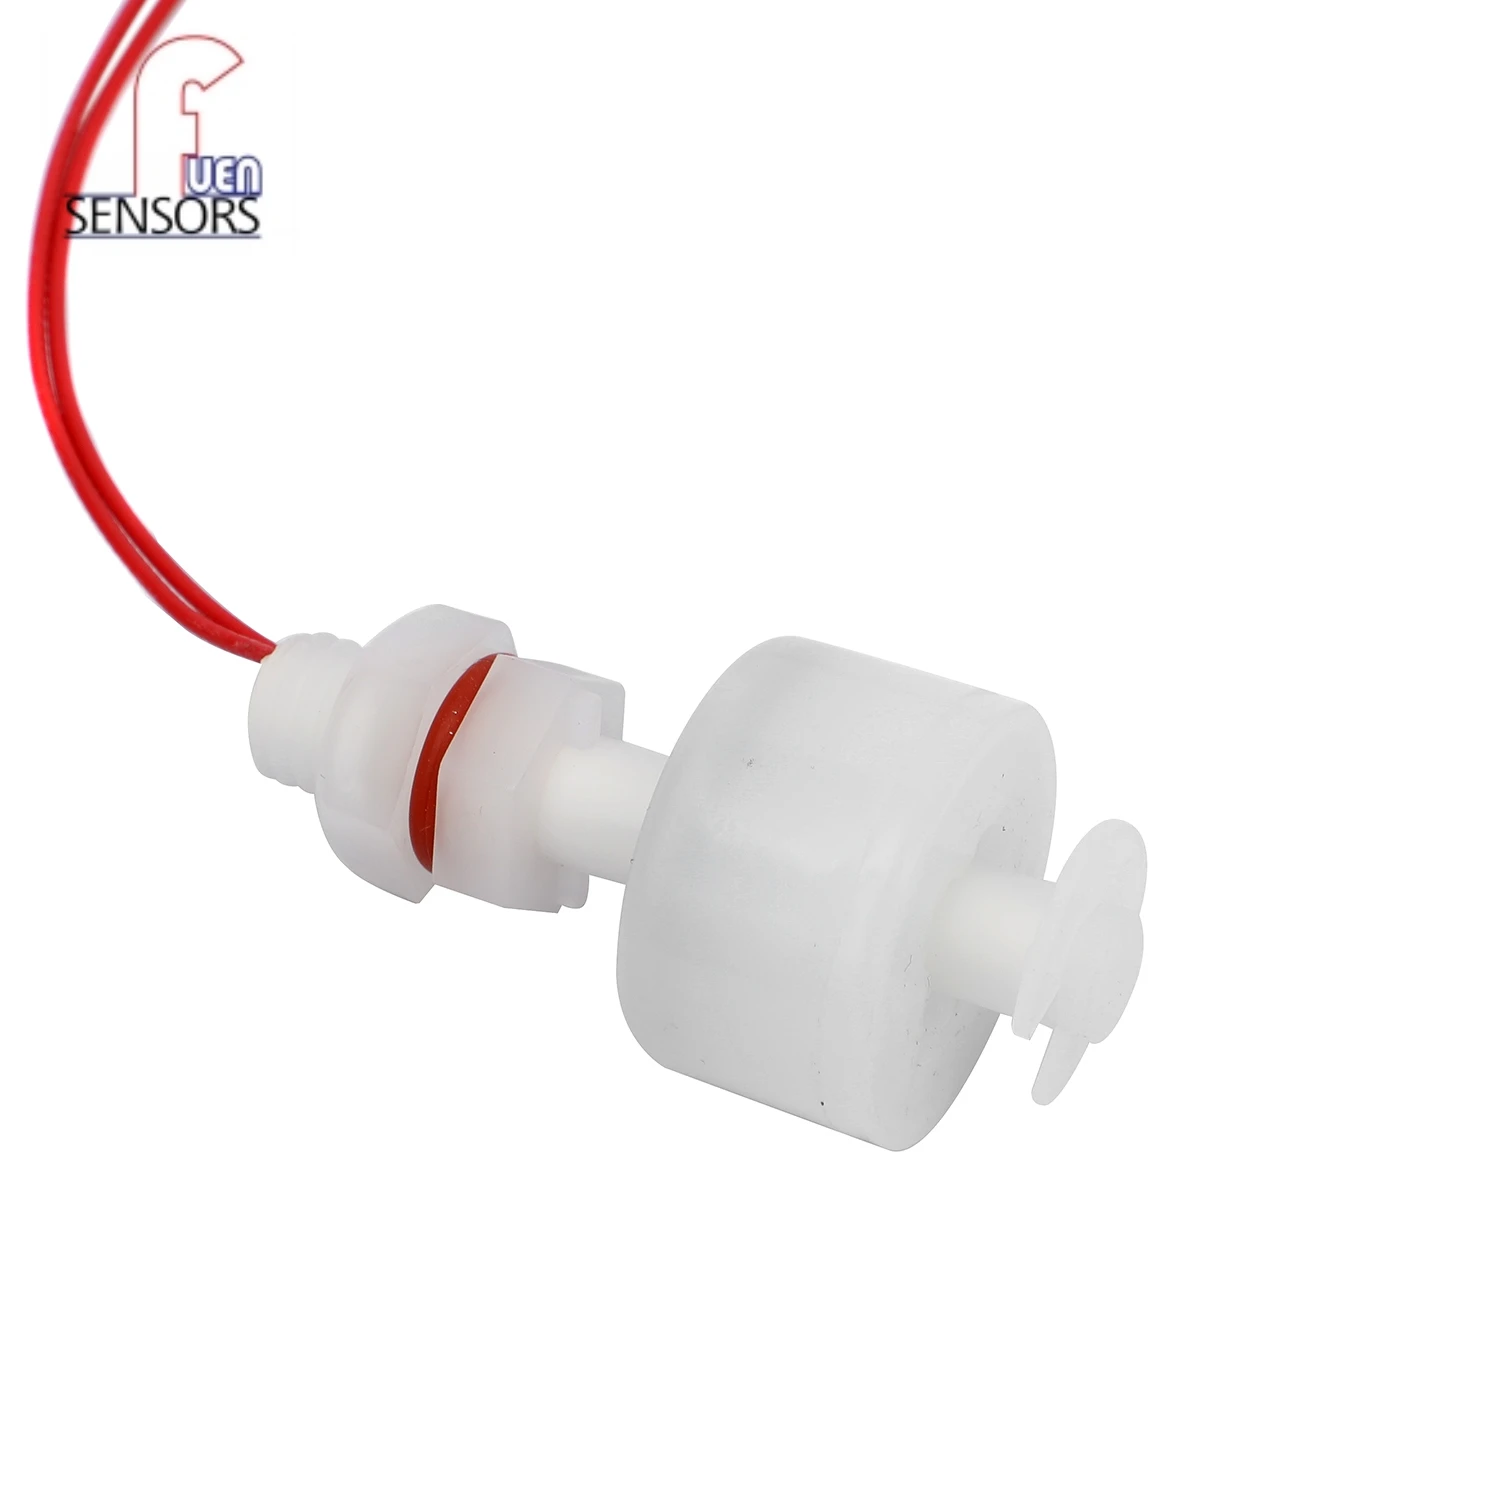 Highly accurate vertical level measuring instruments liquid level sensor float switch